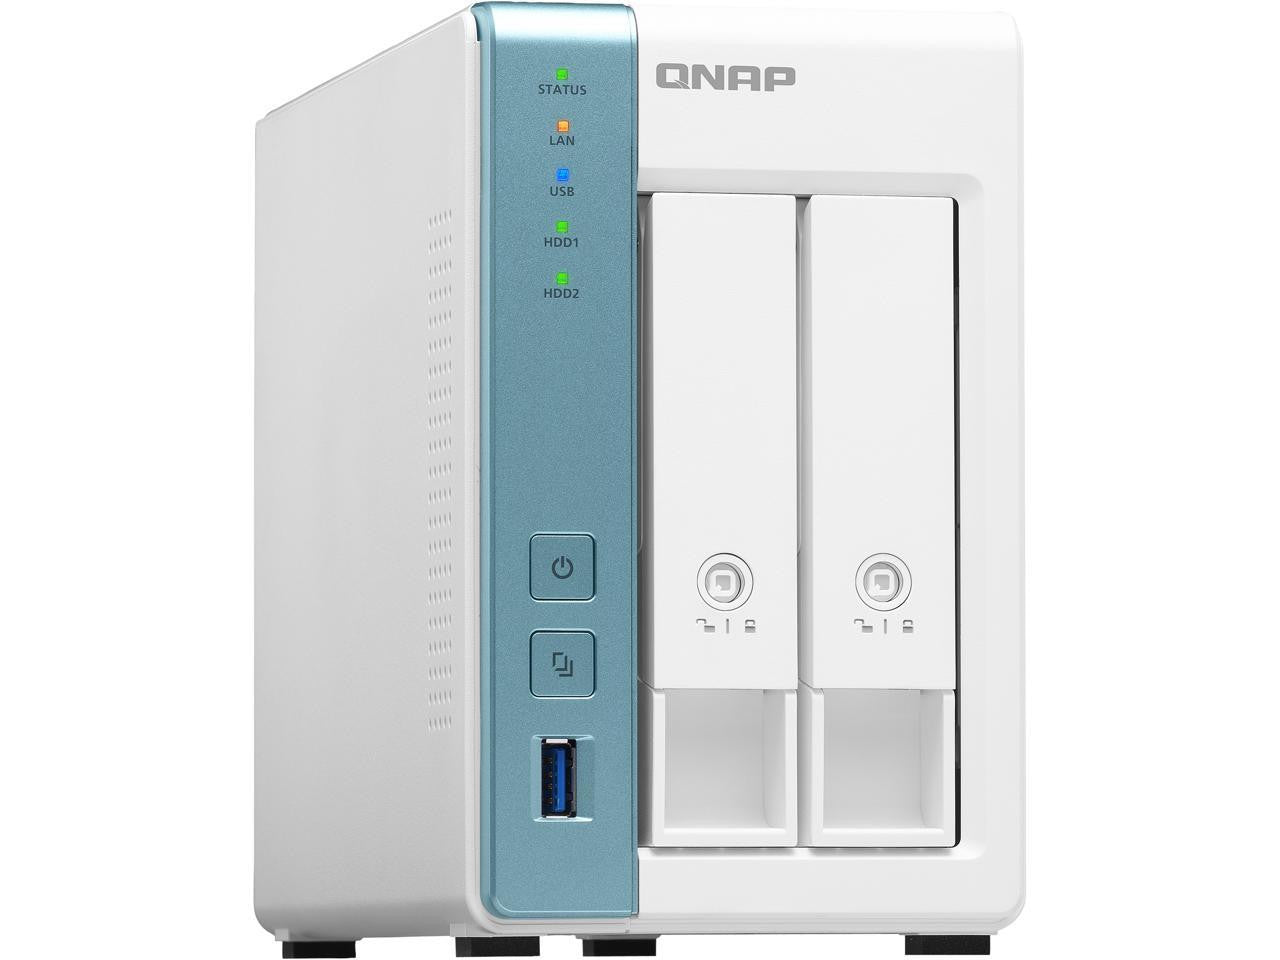 QNAP TS-231K 2-Bay Home NAS with 12TB (2 x 6TB) of Western Digital Red Plus Drives Fully Assembled and Tested